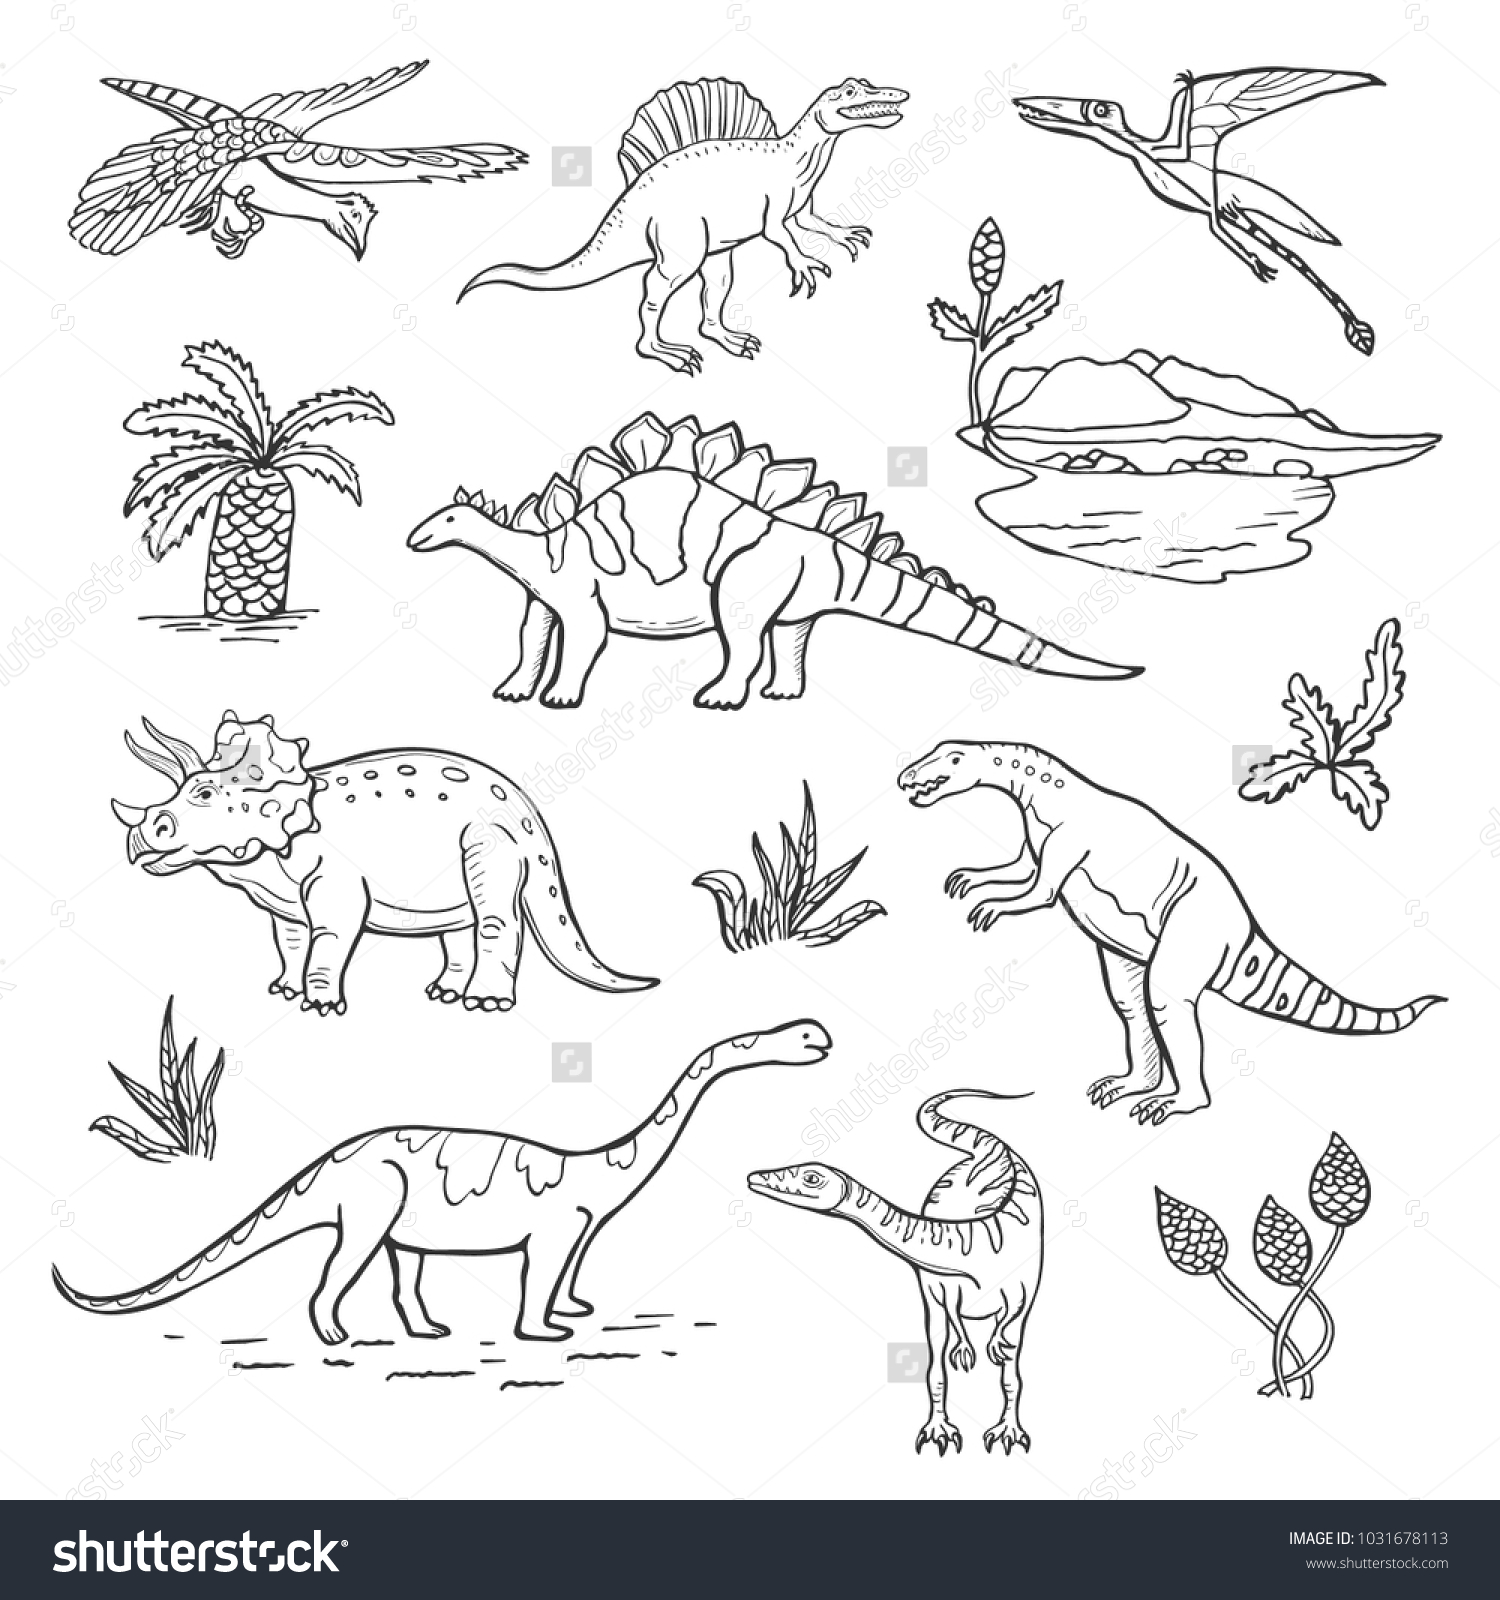 Dinosaur outline drawing Stock Illustrations, Images & Vectors ...